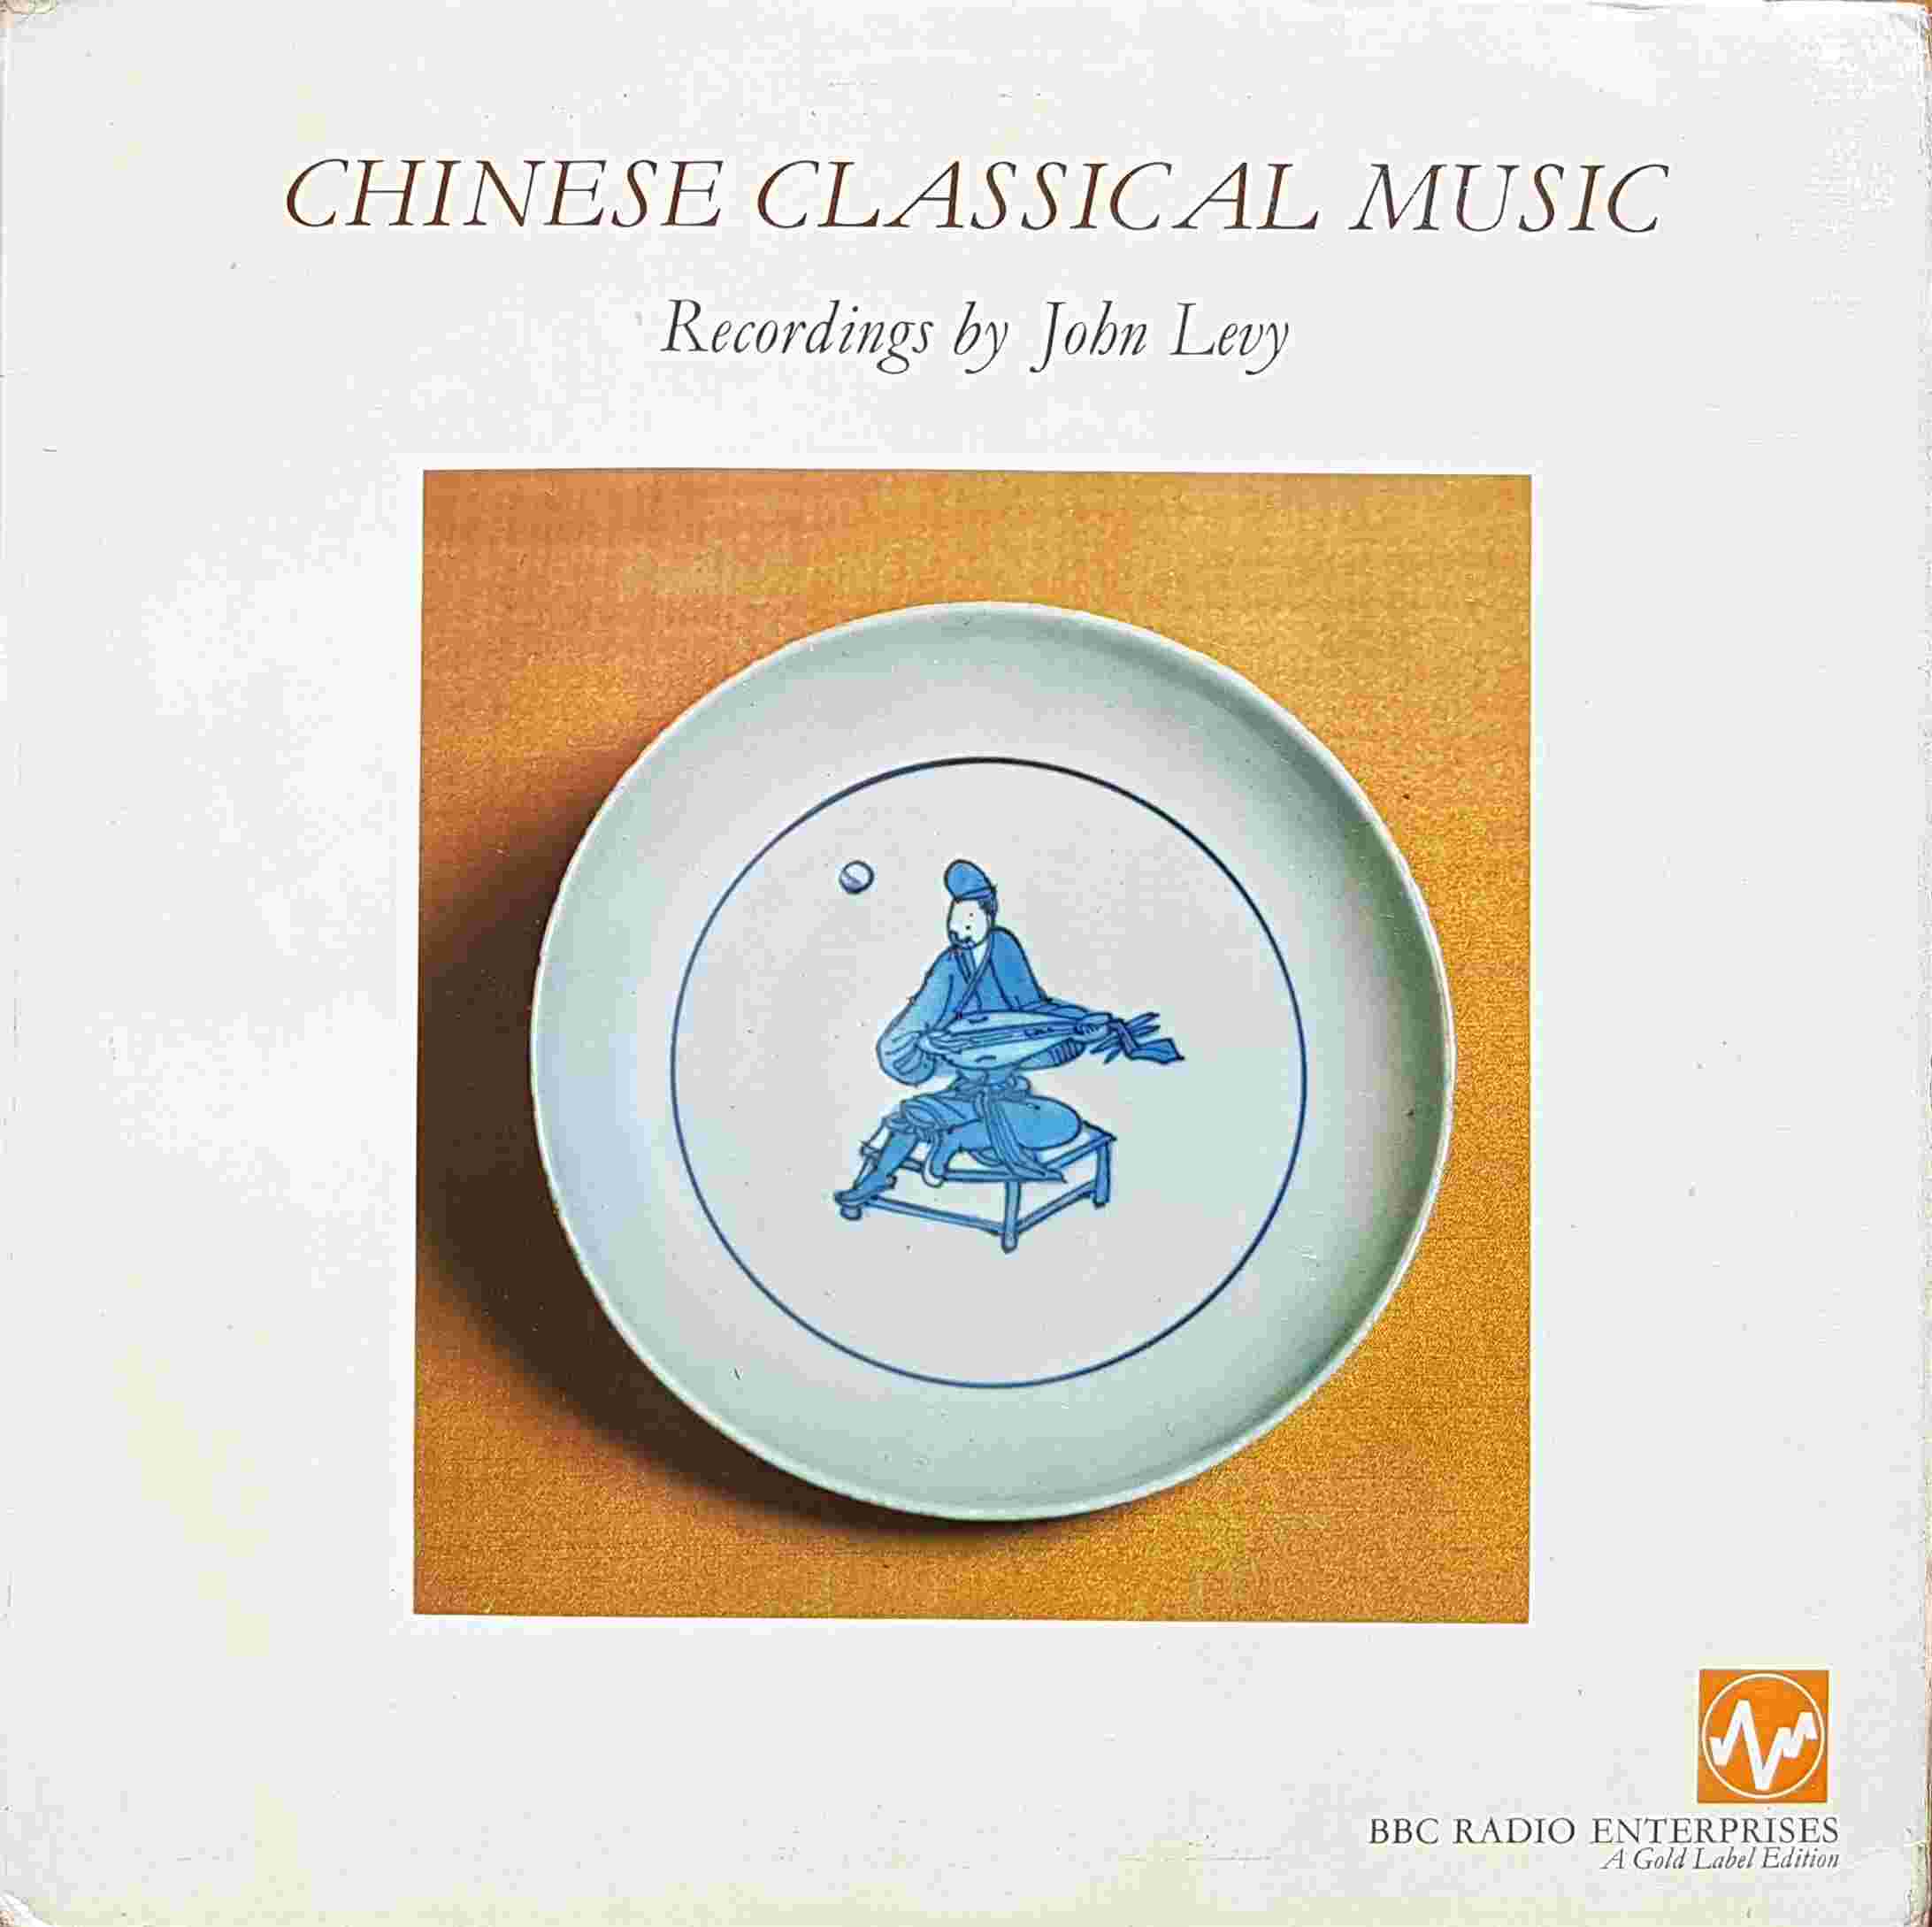 Picture of REGL 1 Chinese classical music by artist Various from the BBC albums - Records and Tapes library